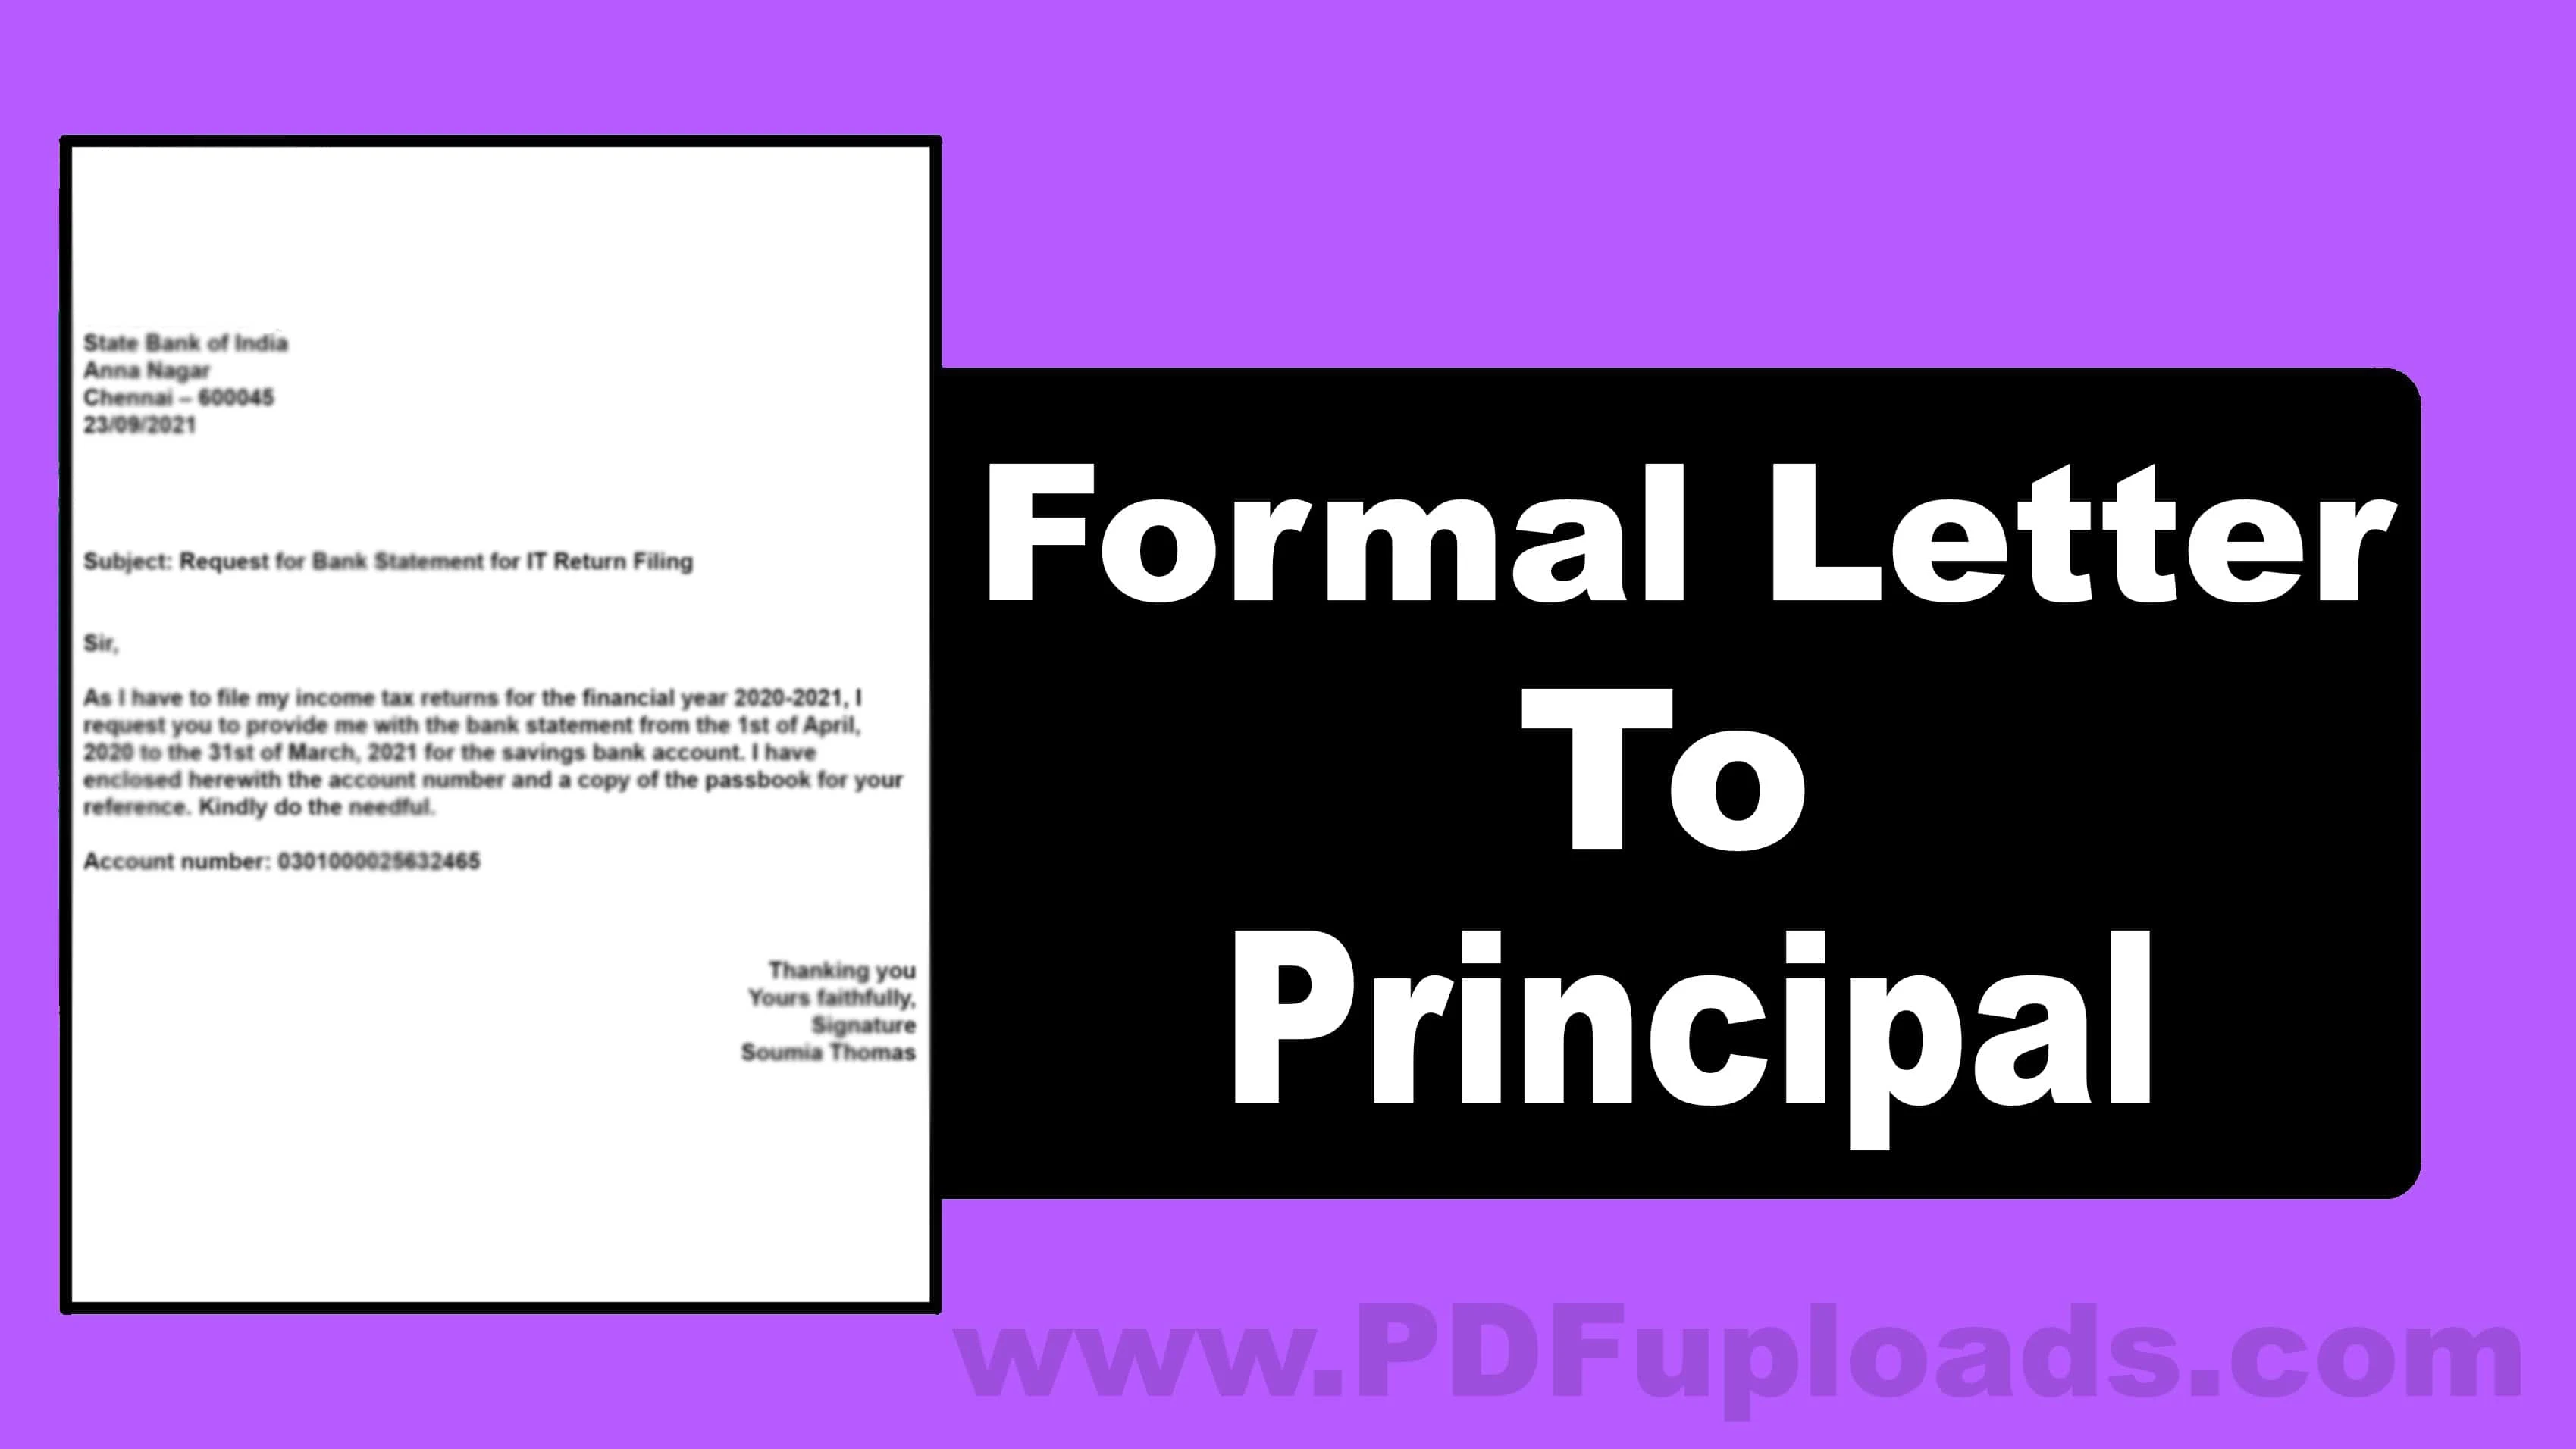 Formal Letter to Principal - How to Write a Letter to the Principal? Format and Sample Letters